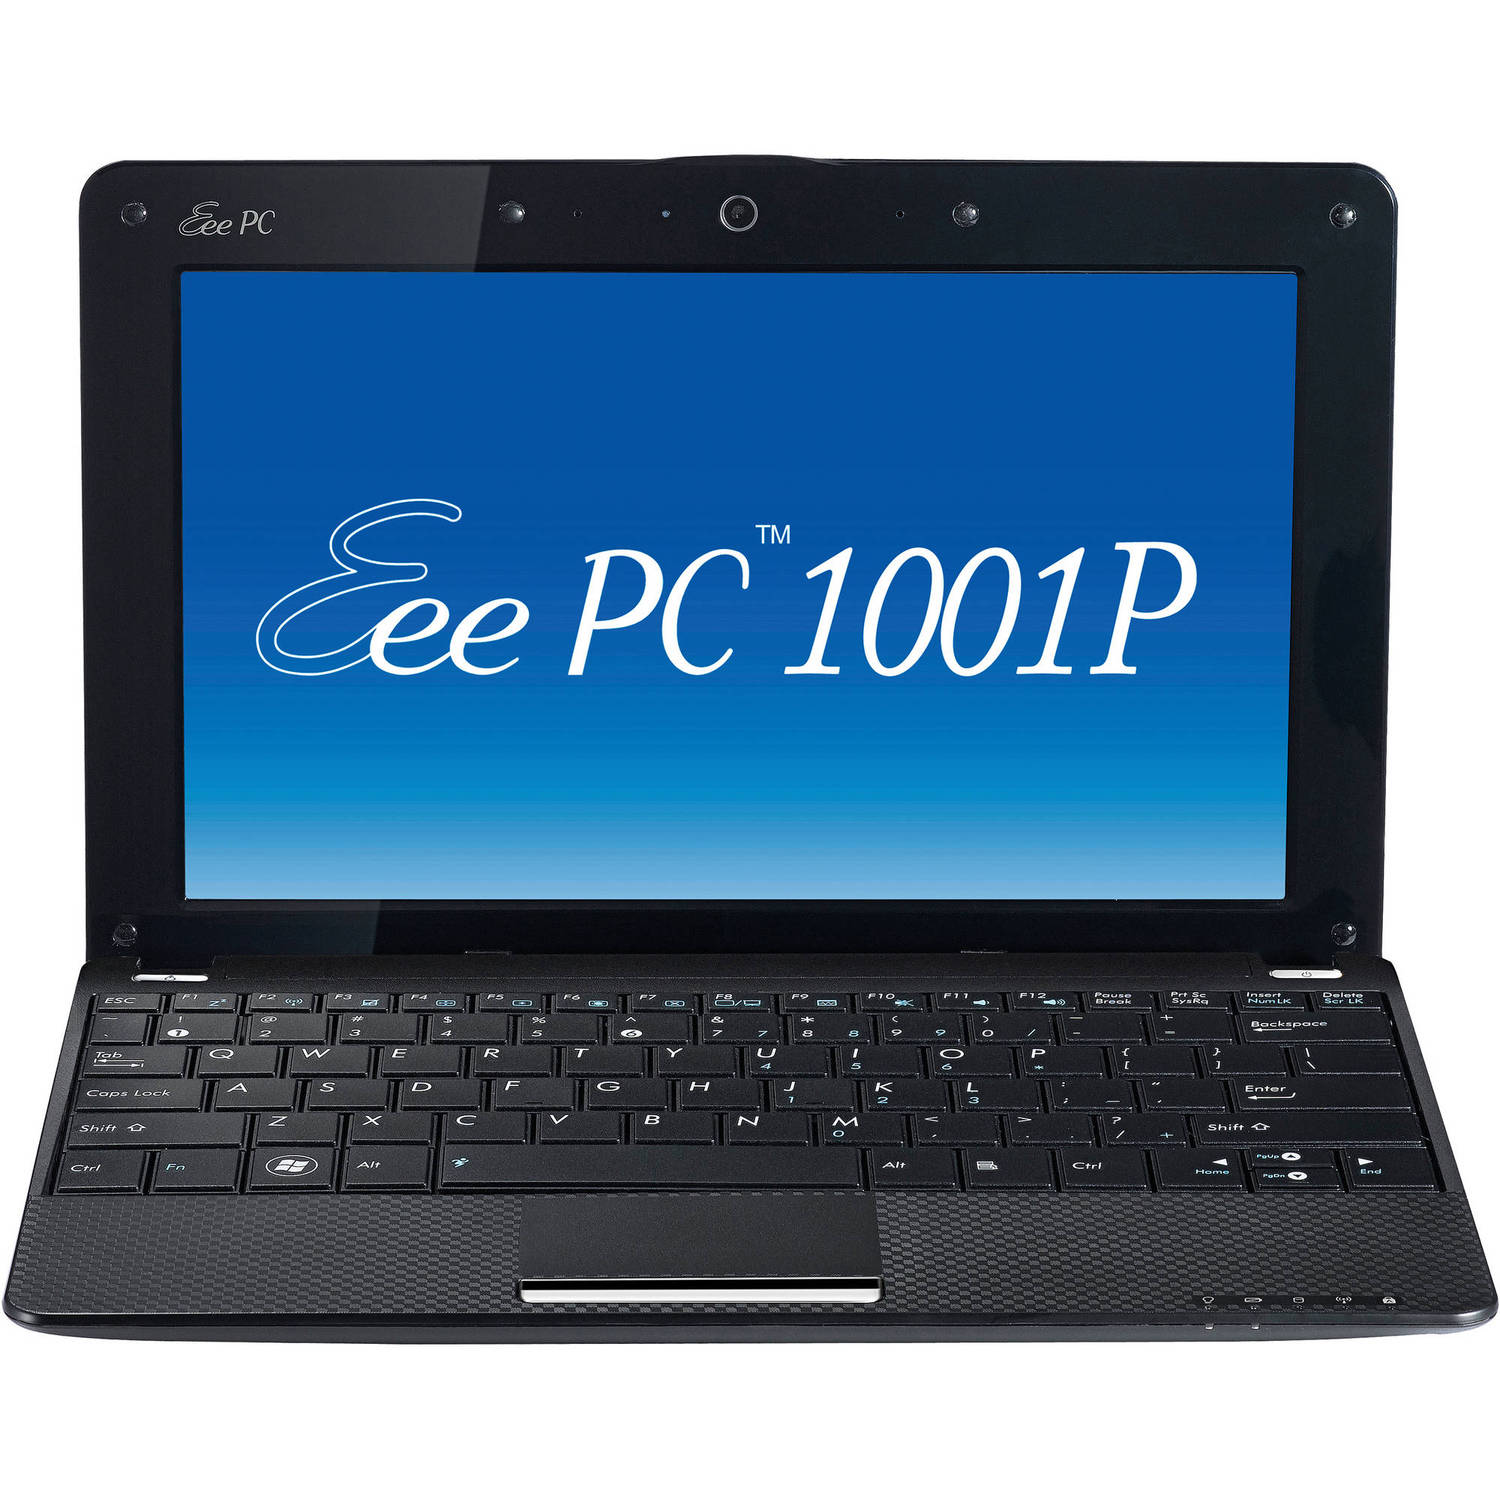 How to reset your eee pc to factory settings windows 10